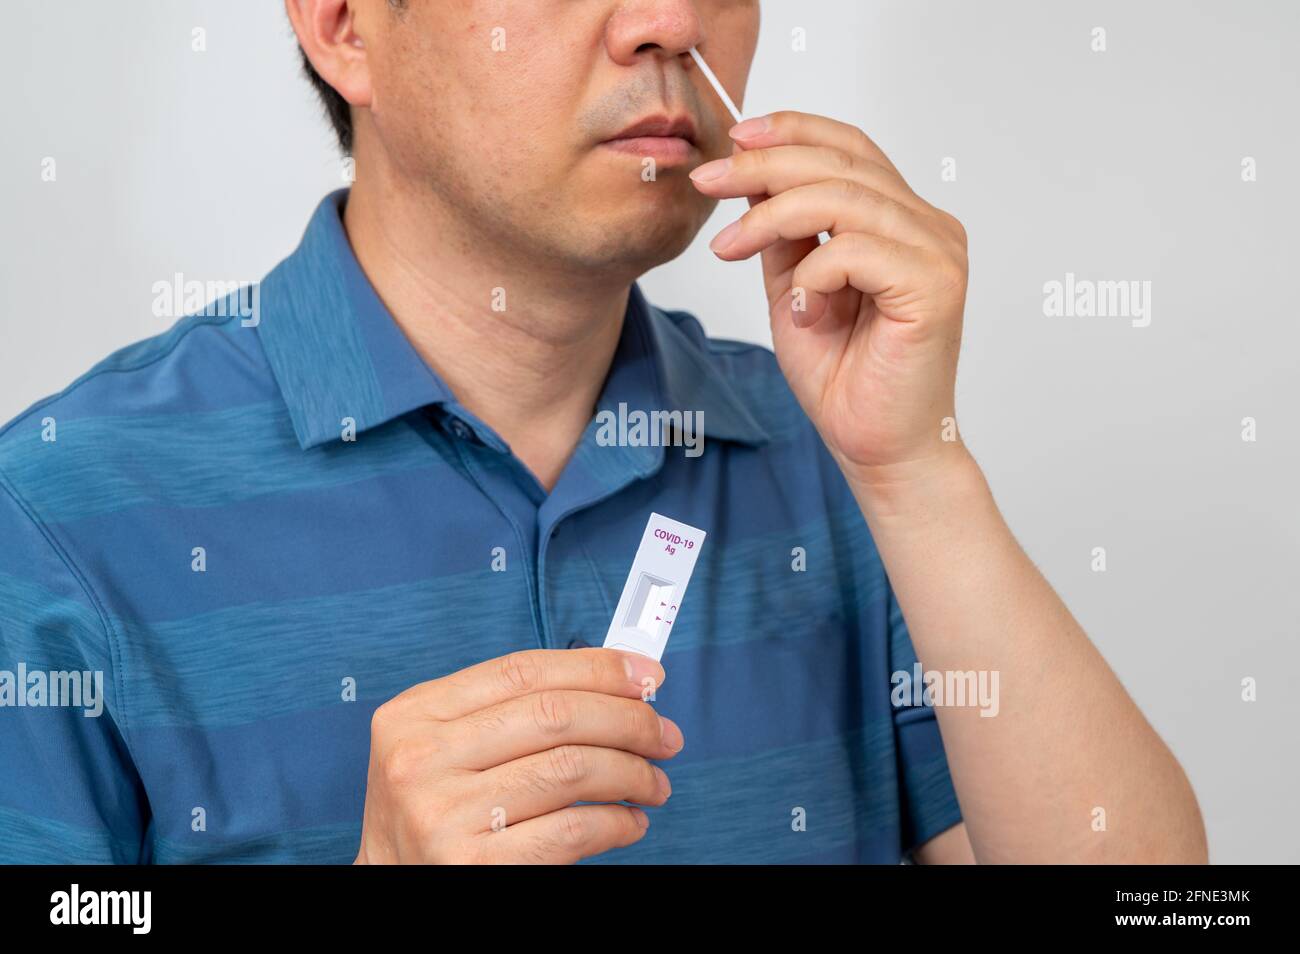 Middle-aged Asian man tested for coronavirus using COVID-19 home antigen kits. Stock Photo